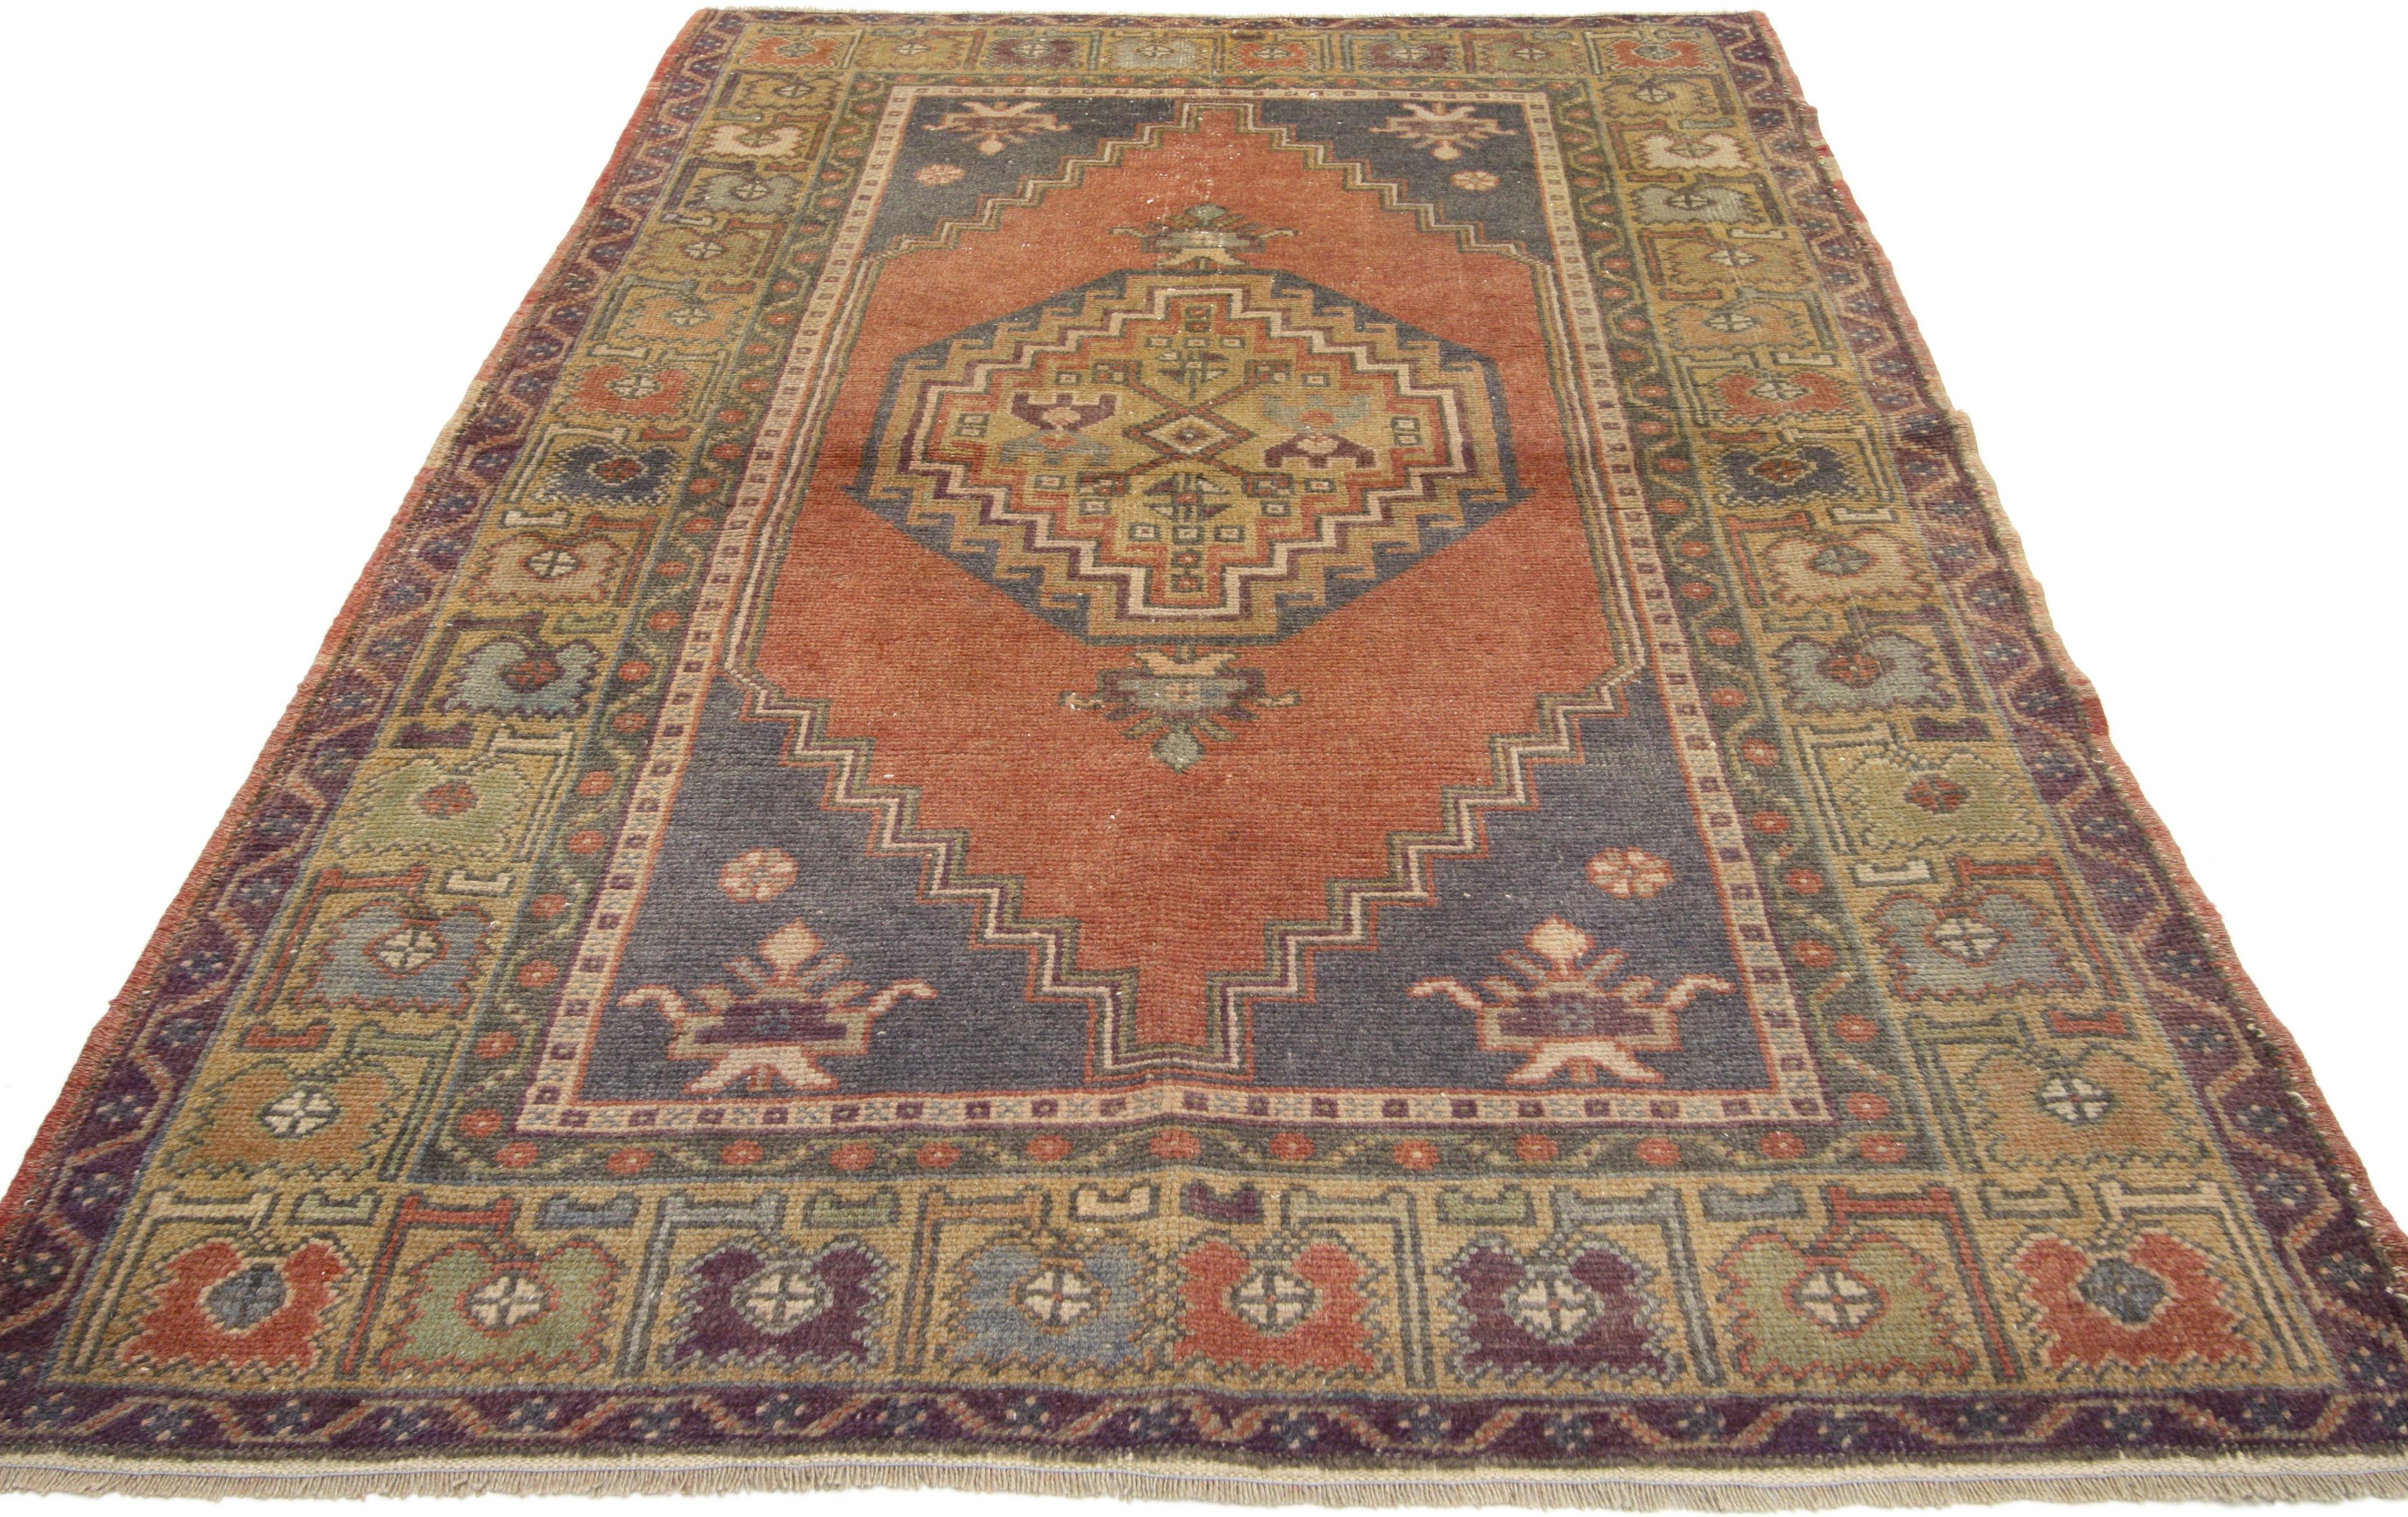 50135, vintage Turkish Oushak Accent rug, entry or foyer rug. This vintage Turkish Oushak rug features a modern traditional style. Immersed in Anatolian history and refined colors, this vintage Oushak rug combines simplicity with sophistication.